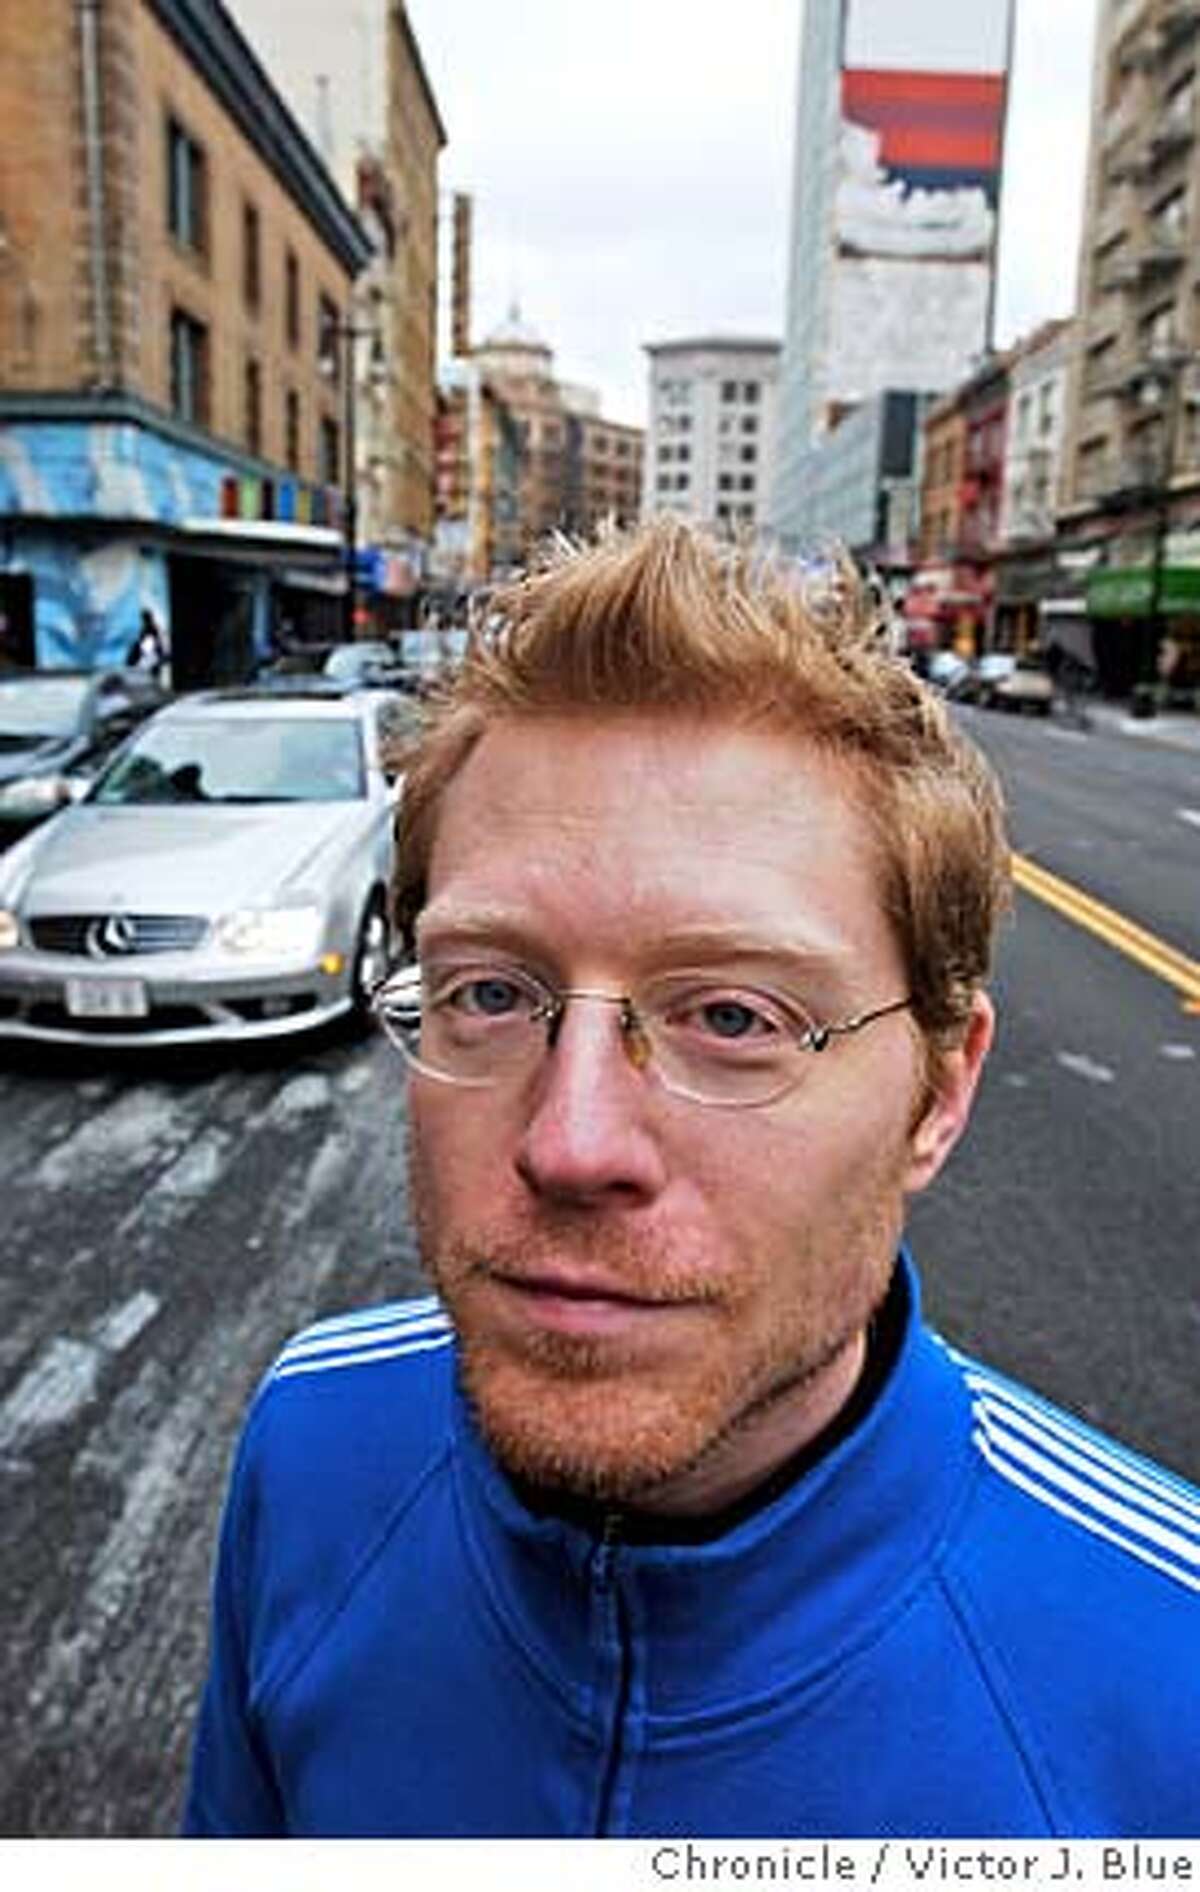 Actor Anthony Rapp on Sixth St. in San Francisco CA Friday Feb. 17, 2006. Rapp came out of nowhere to work in a musical in development in 1996 that came to be called Rent. More recently he starred in the film version of the play, with many of the "New York" scenes filmed on Sixth St. in San Francisco. Rapp has written a memoir called Without You, which is about the very emotional creation of Rent as well as his coping with his mother's terminal cancer. Victor J. Blue / The Chronicle